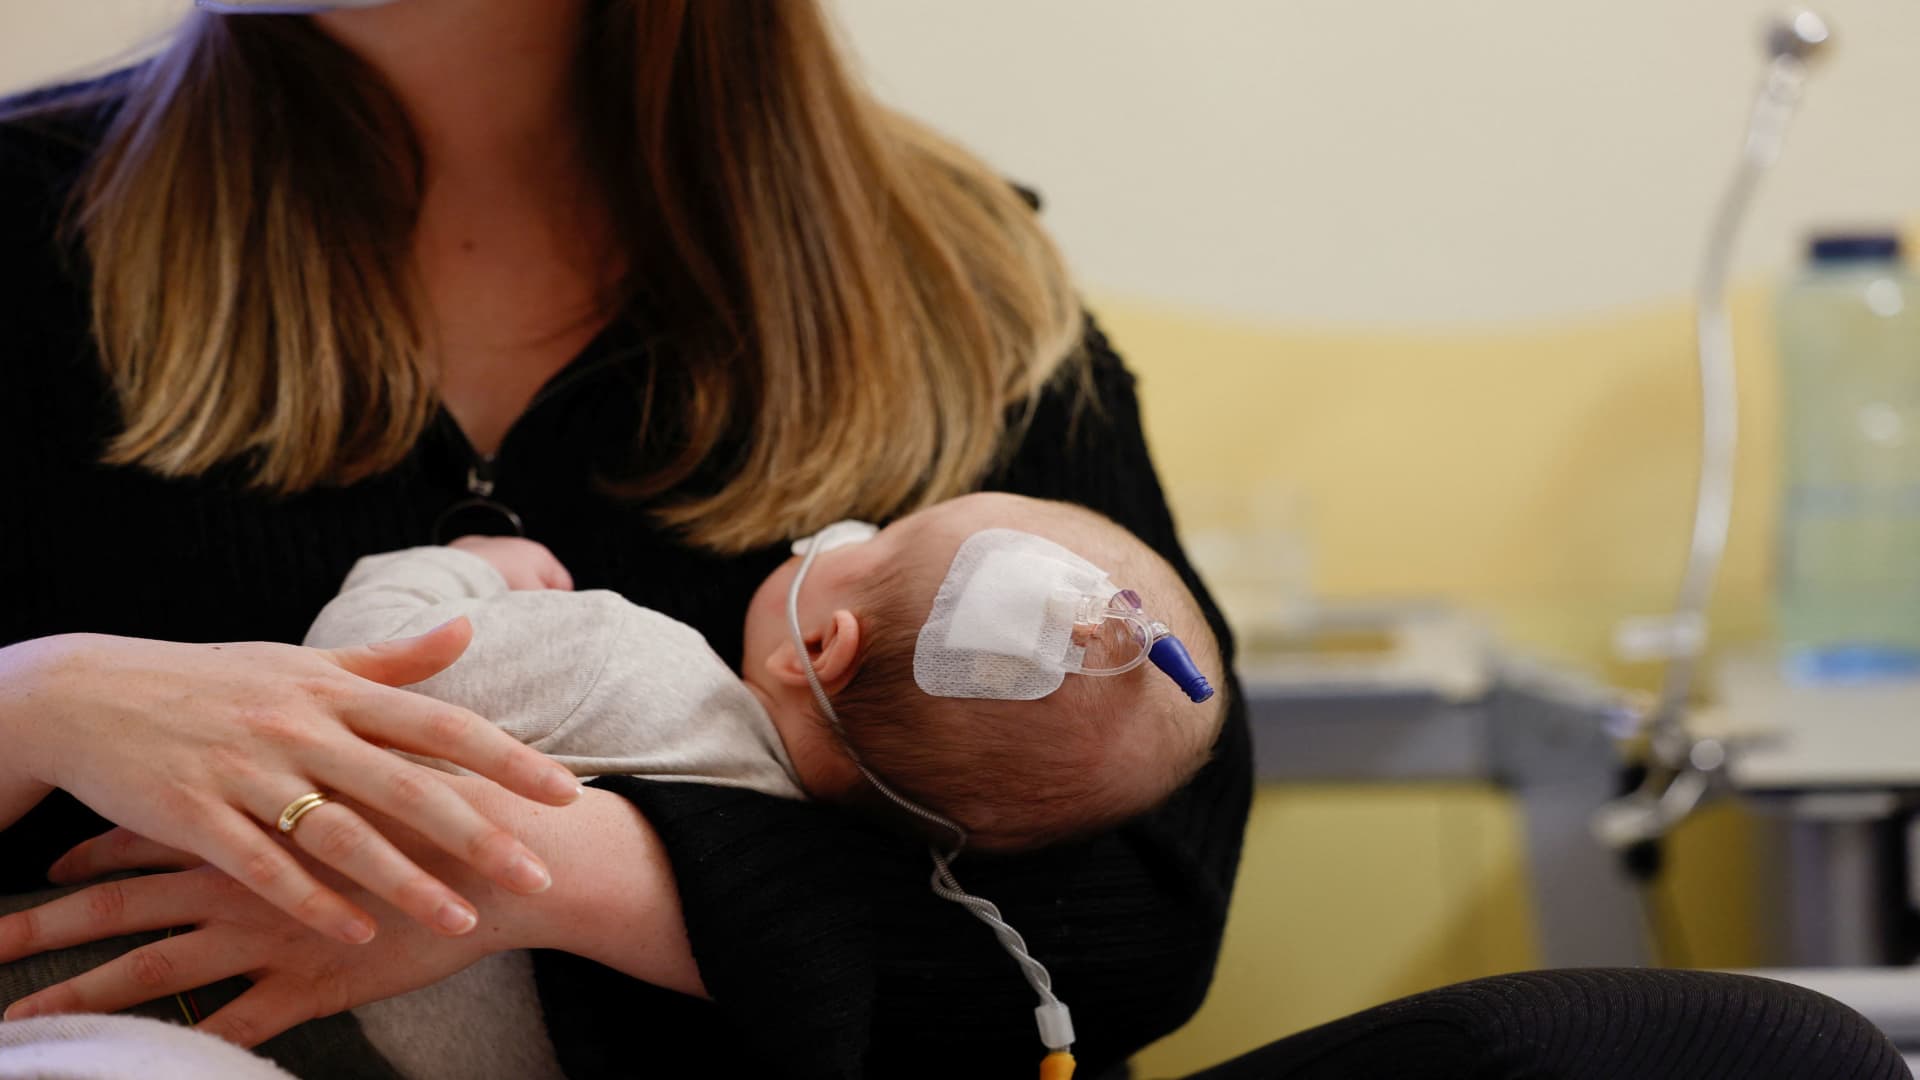 CDC expedites release of more doses of infant RSV drug from Sanofi, AstraZeneca amid shortage